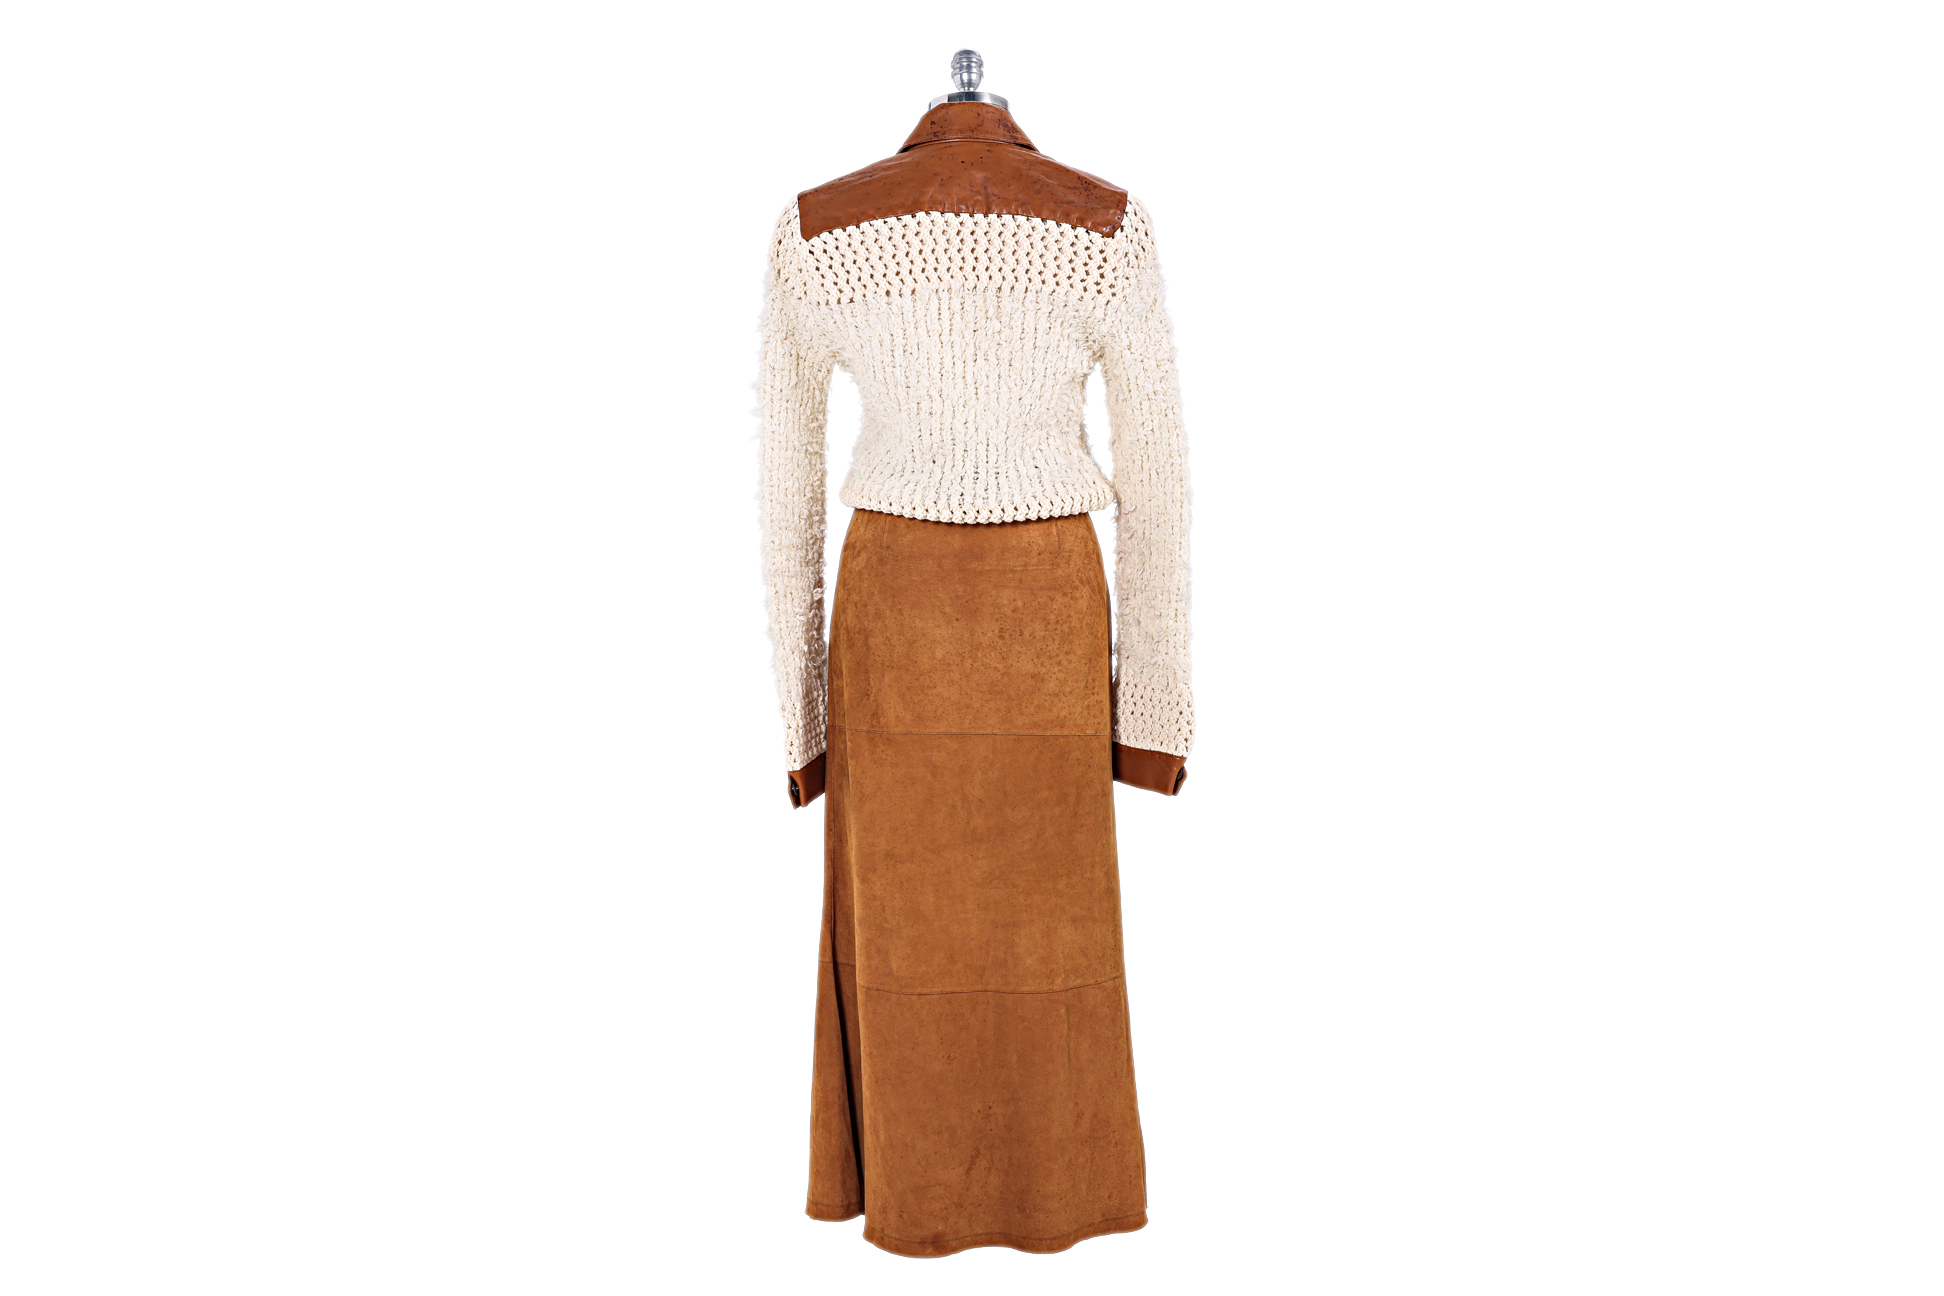 A CHRISTIAN DIOR CROCHET JACKET WITH SUEDE MAXI SKIRT - Image 2 of 2